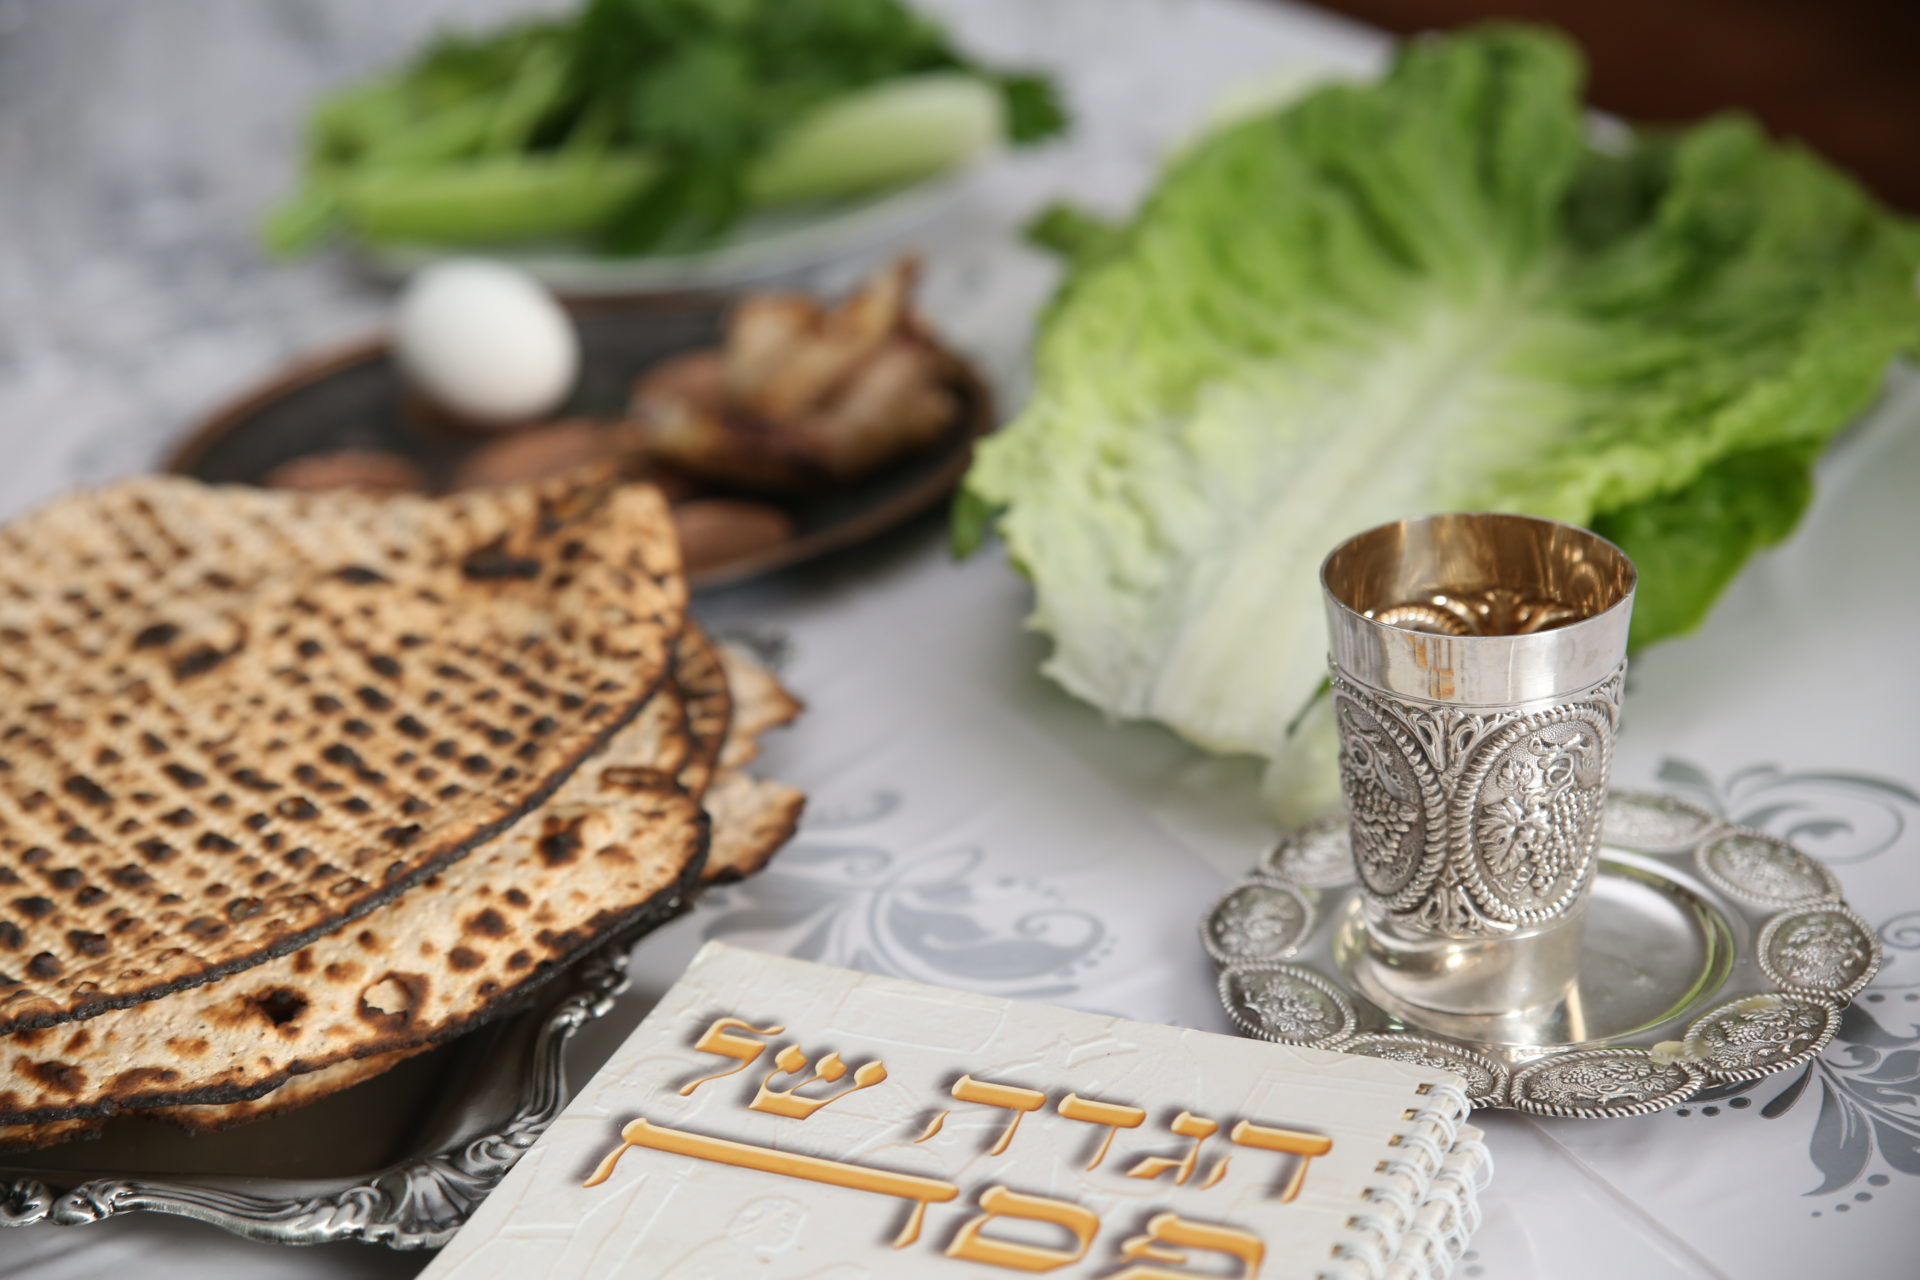 Record 115,000 Jews to Participate in Passover Programs this Passover